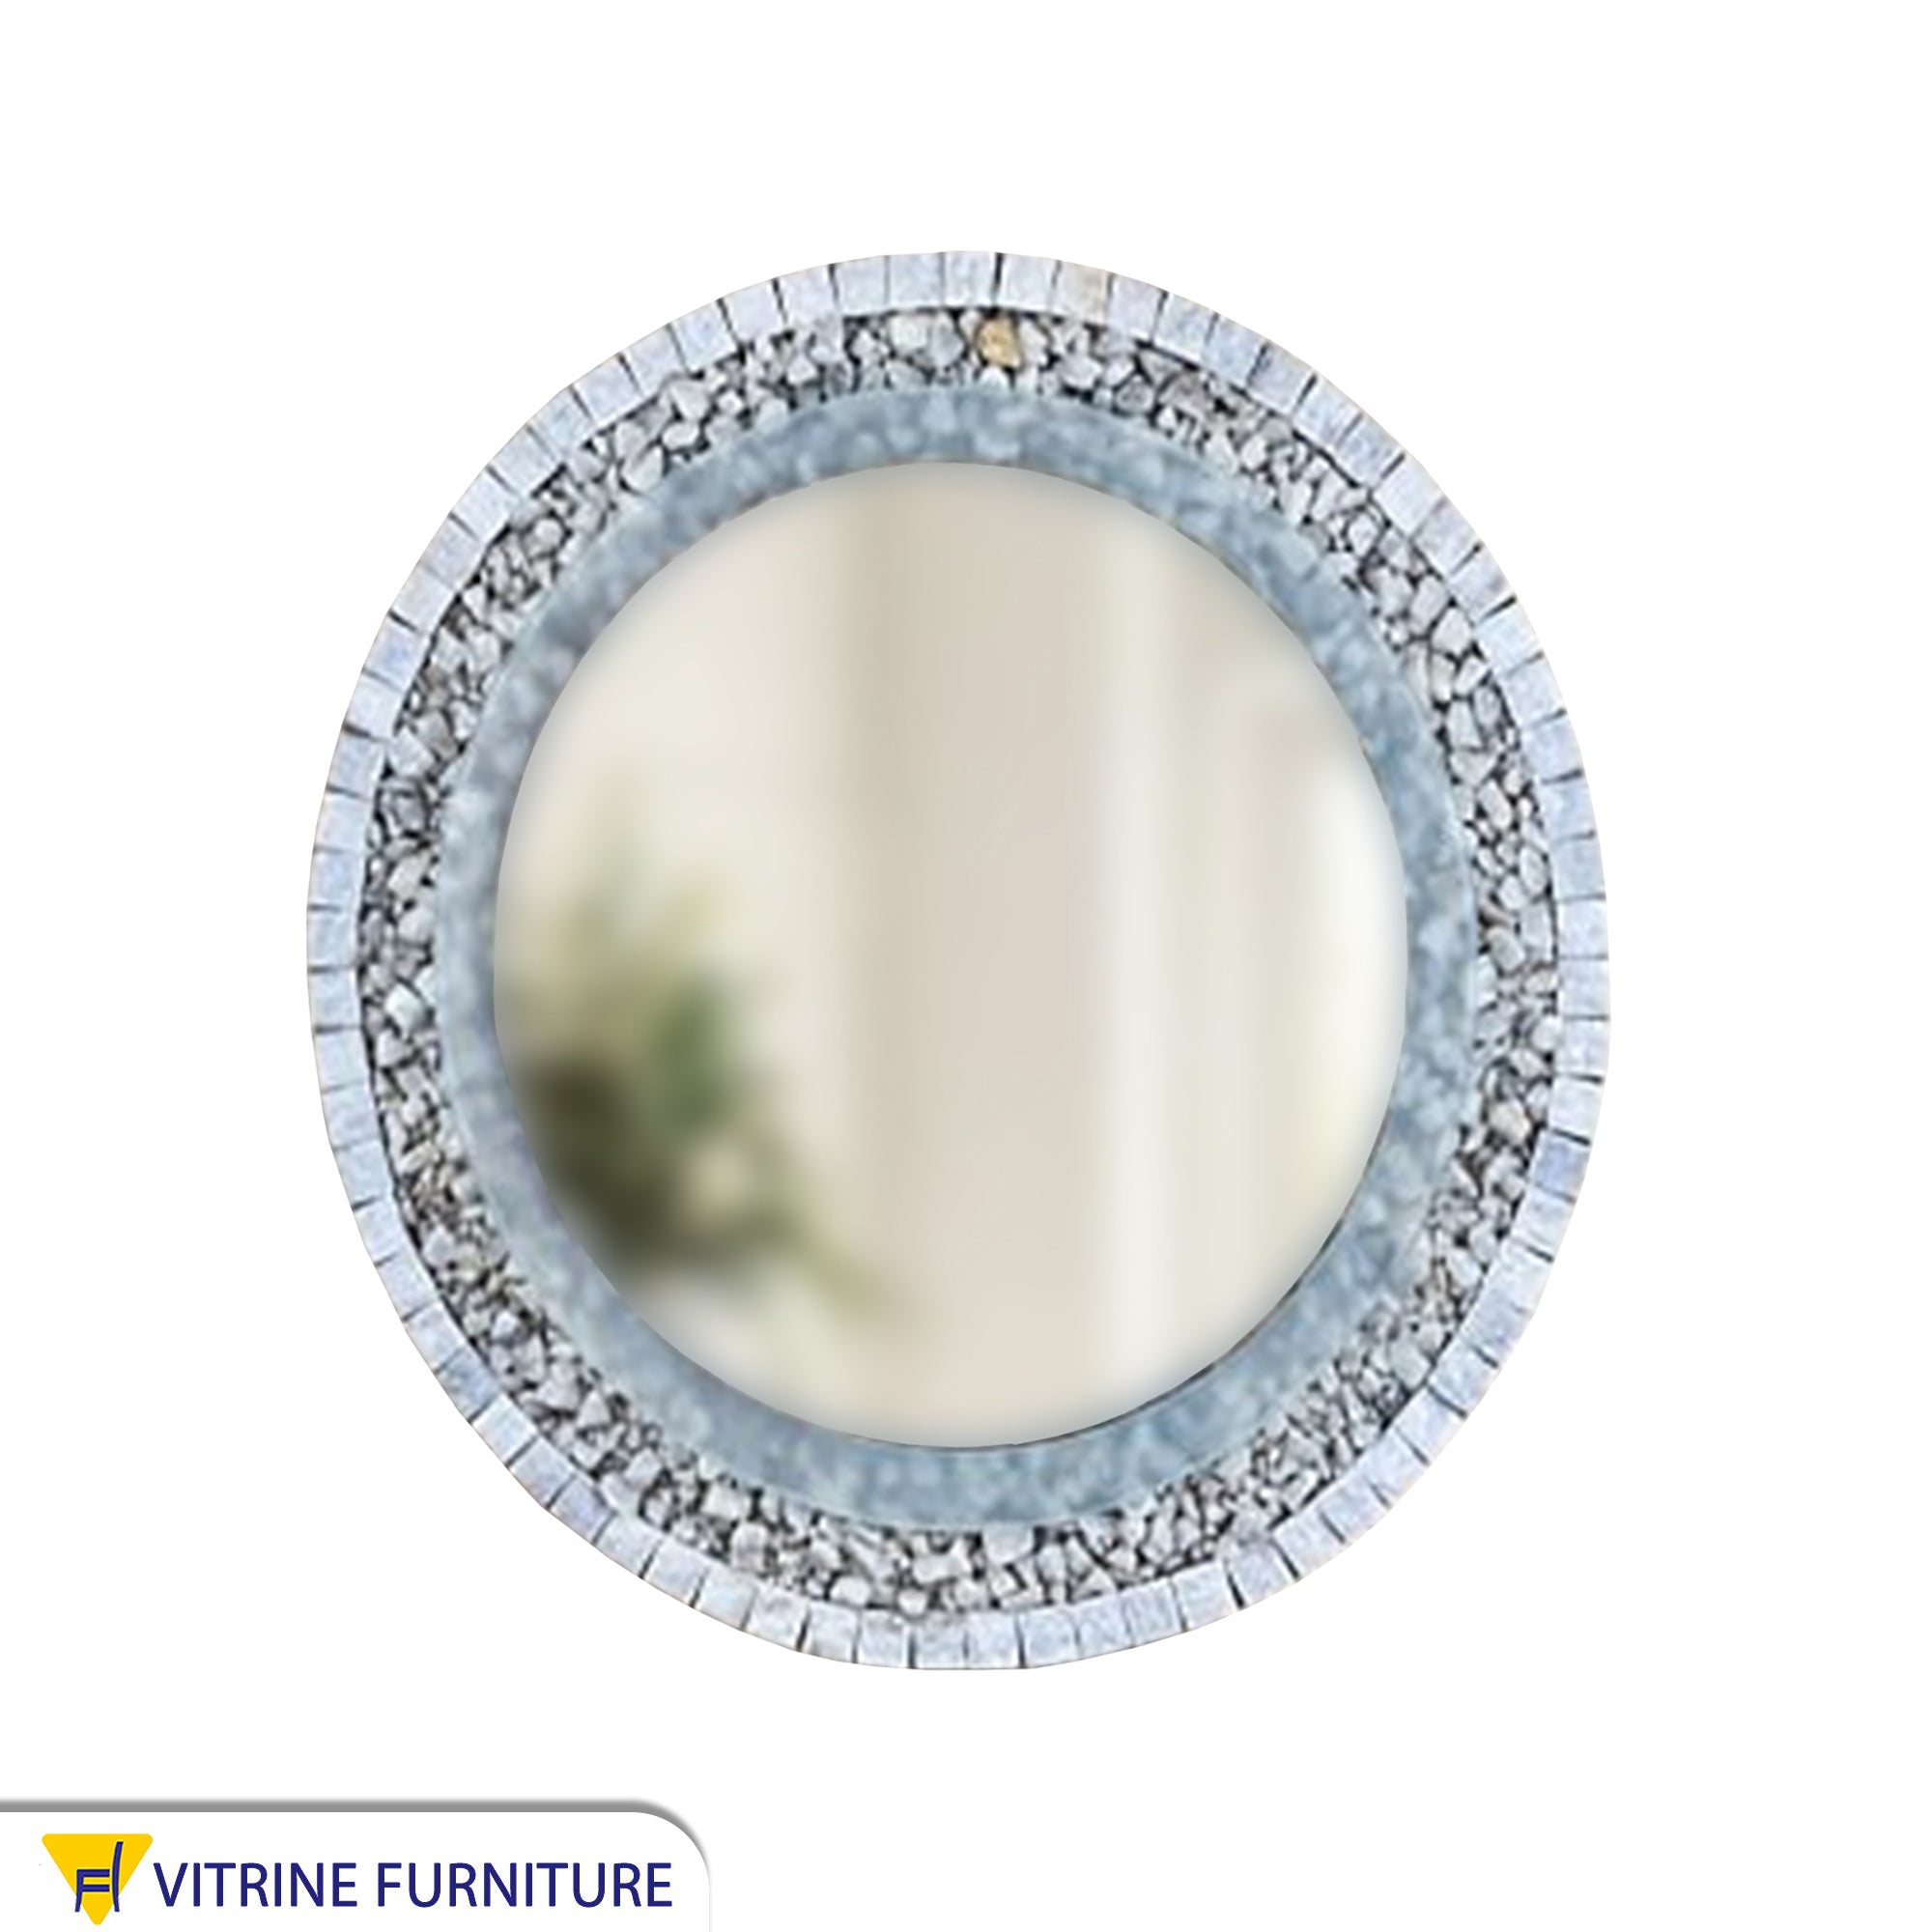 Circular mirror with marble and stone frame